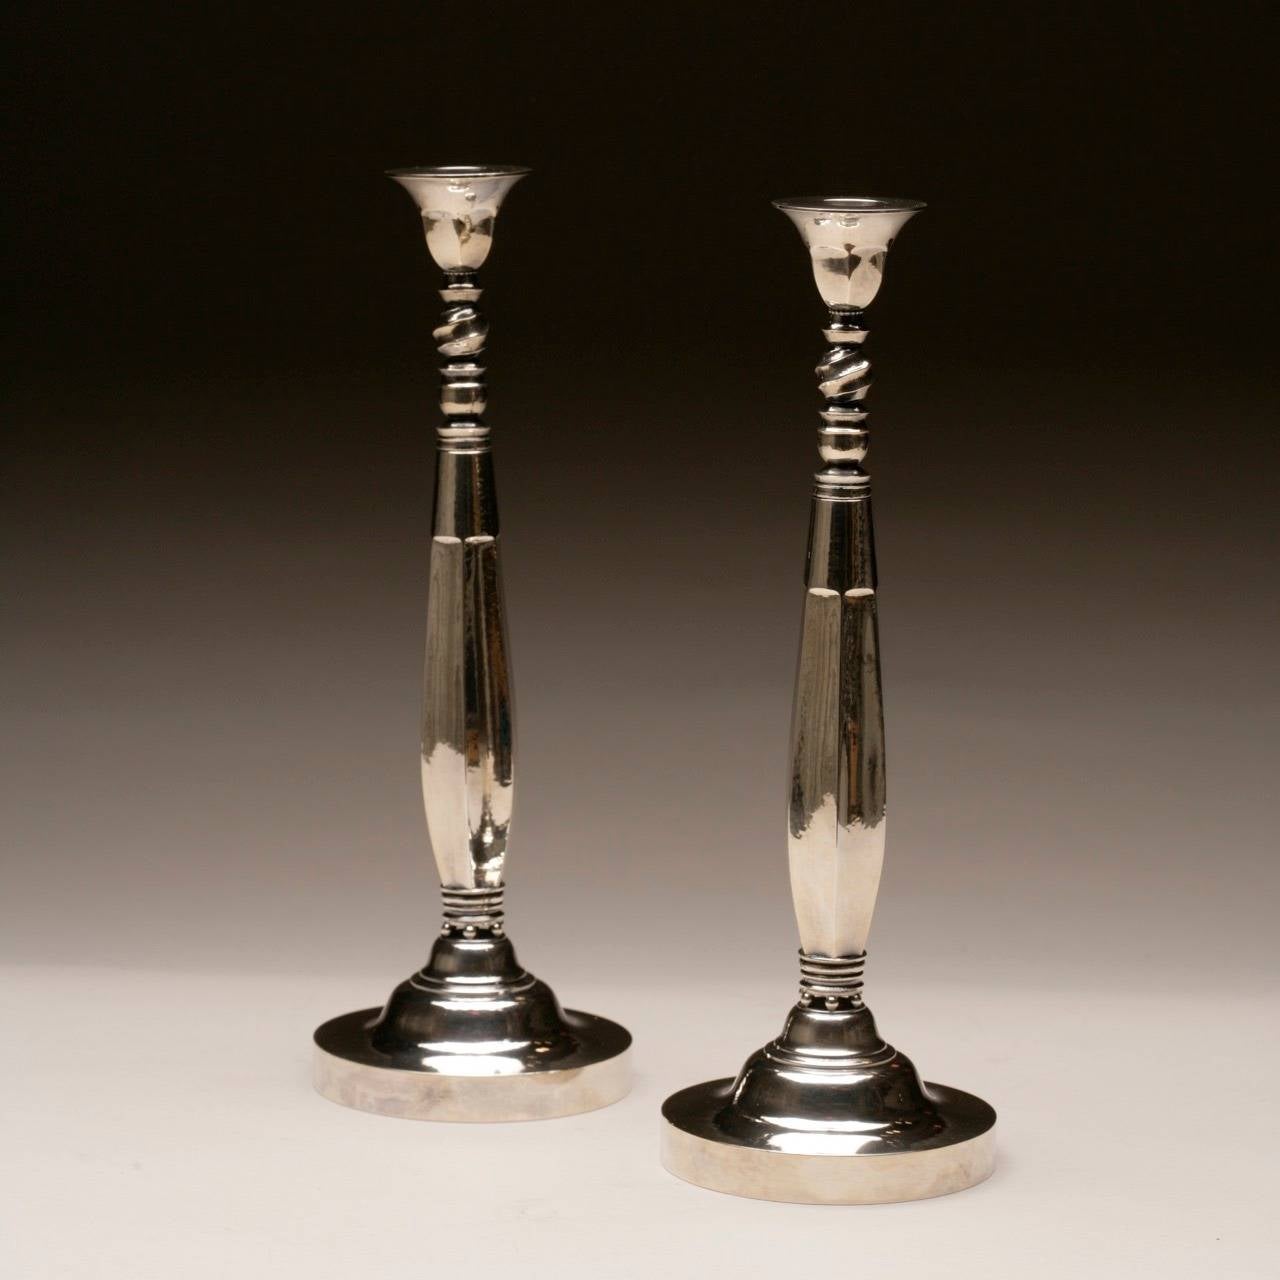 Very rare Georg Jensen candlesticks, no. 441 by Johan Rohde. Designed in 1915.

Elegant and refined; hand-hammered throughout. 12.5